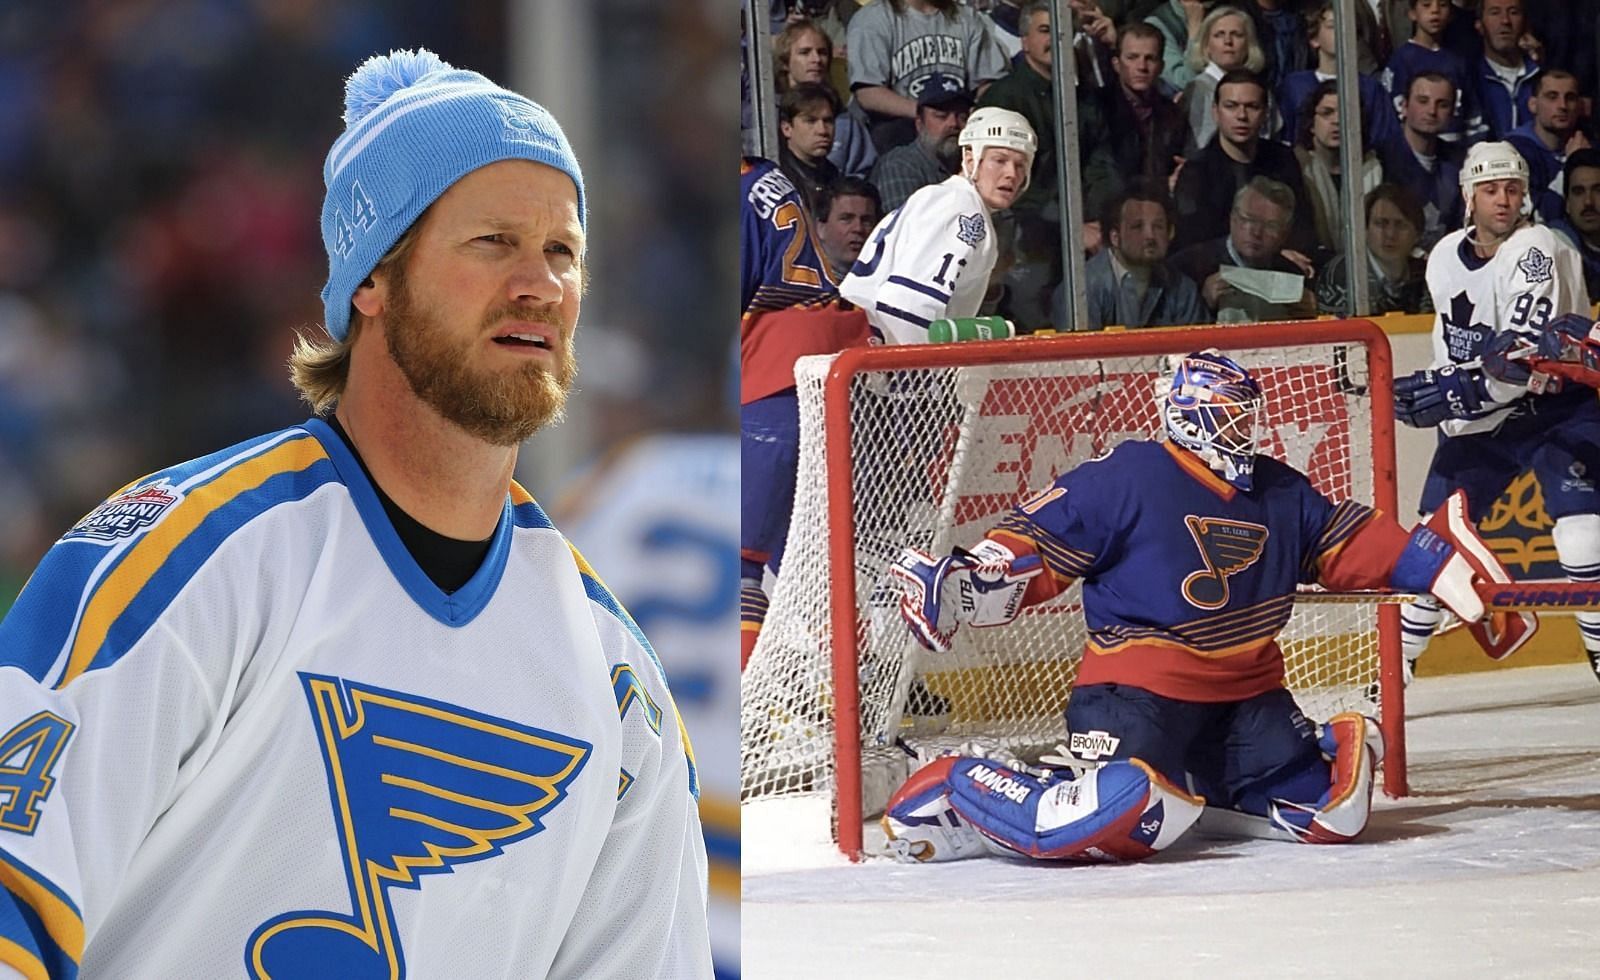 St. Louis Blues teammate once made Chris Pronger grieve for nearly losing out on $1,000,000